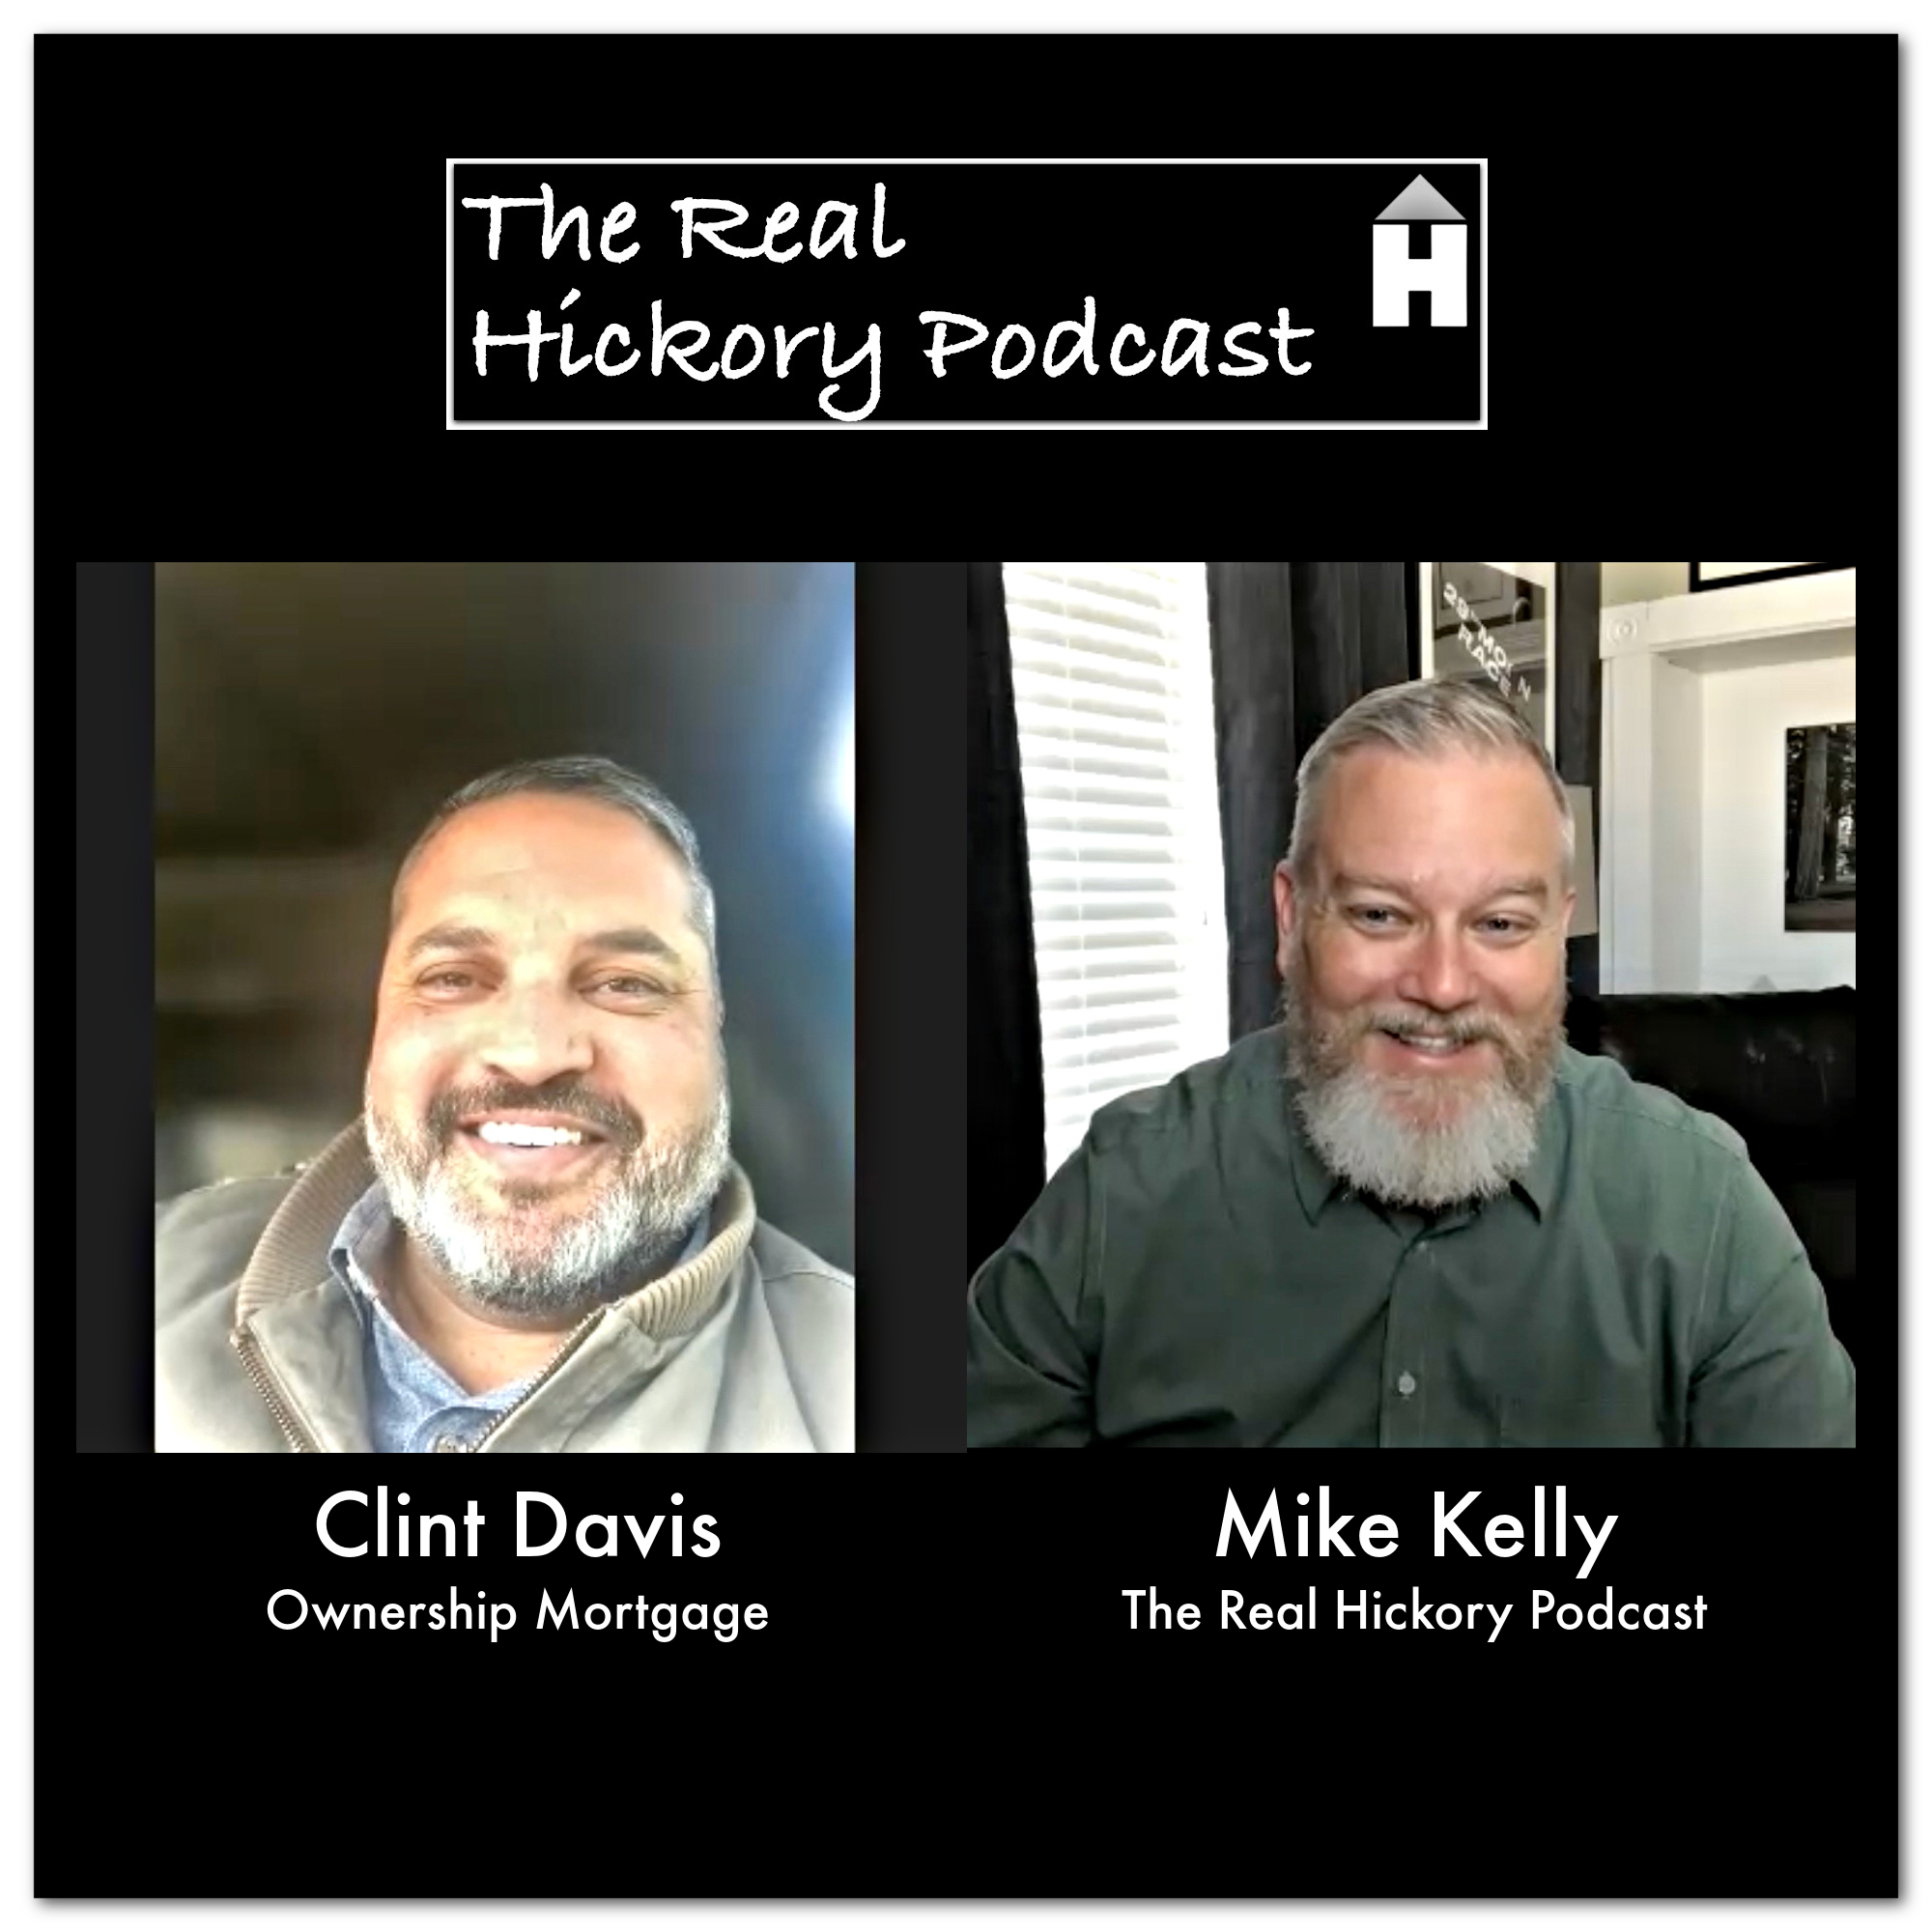 The Real Hickory Podcast